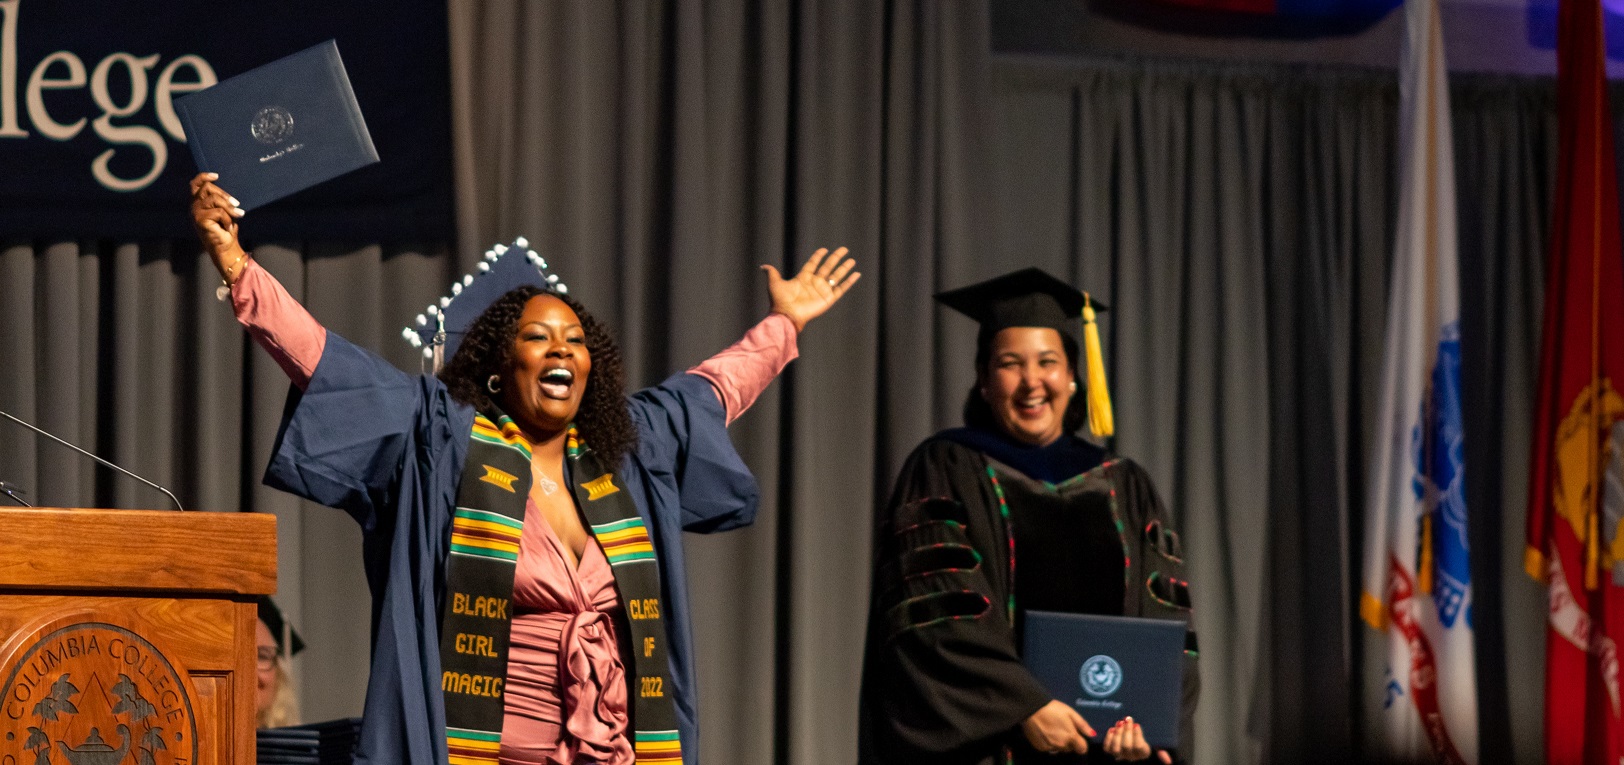 Graduate raises her hands to the sky, wearing a huge smile, as she crosses the stage during commencement ceremony.